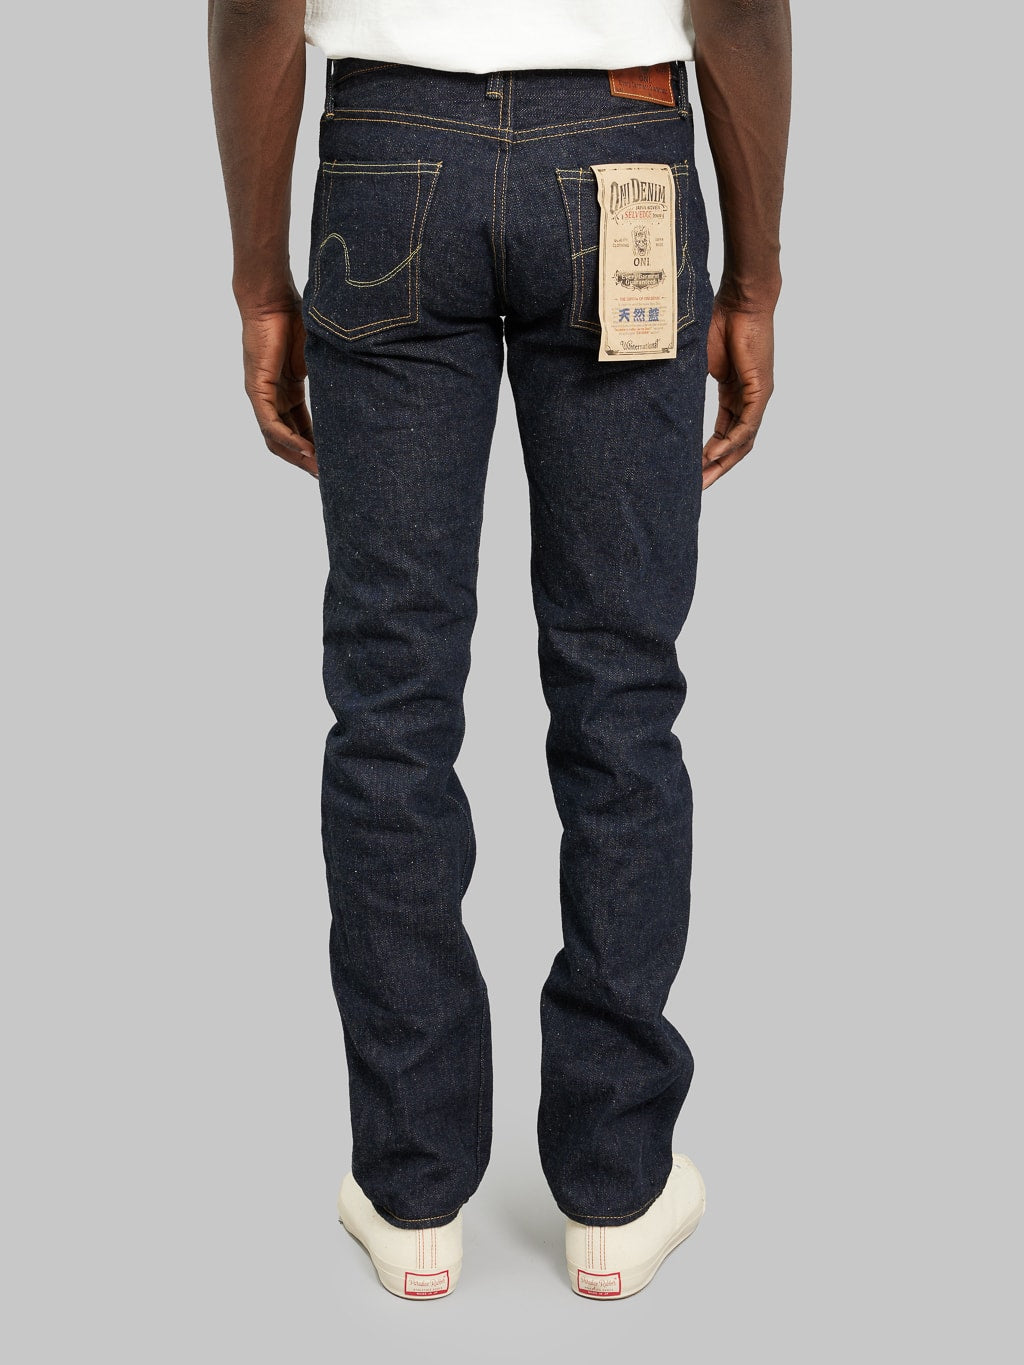 ONI 525 Natural Indigo Rope Dyeing Denim Classic Straight Jeans back fit